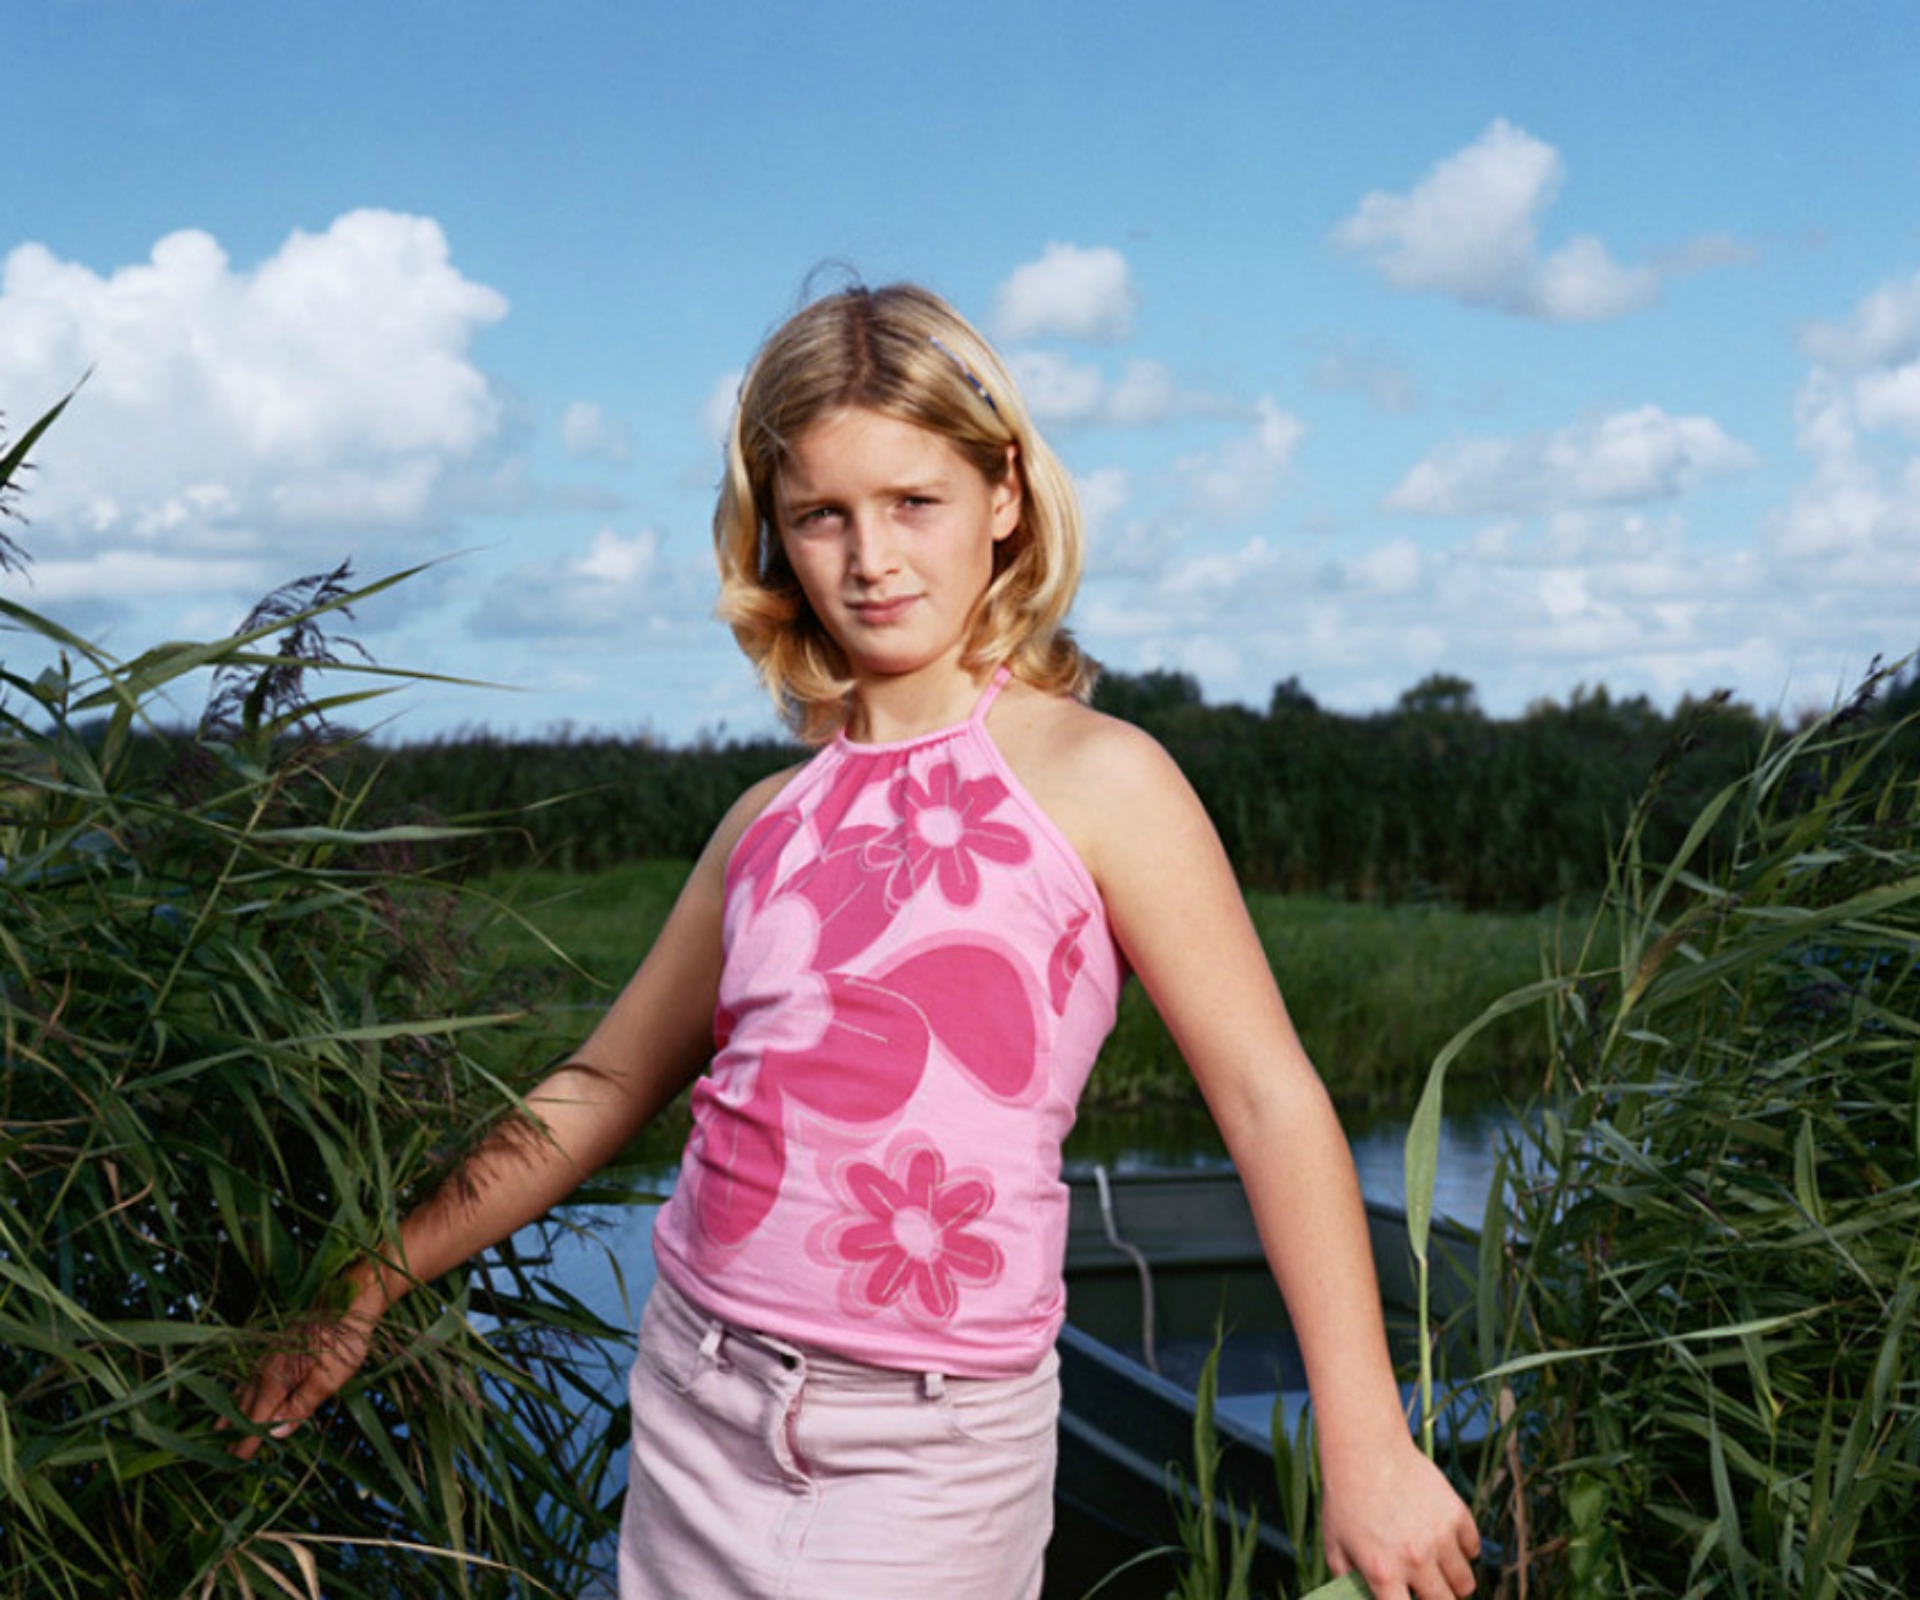 Inside out: Portraits of transgender children will take your breath away